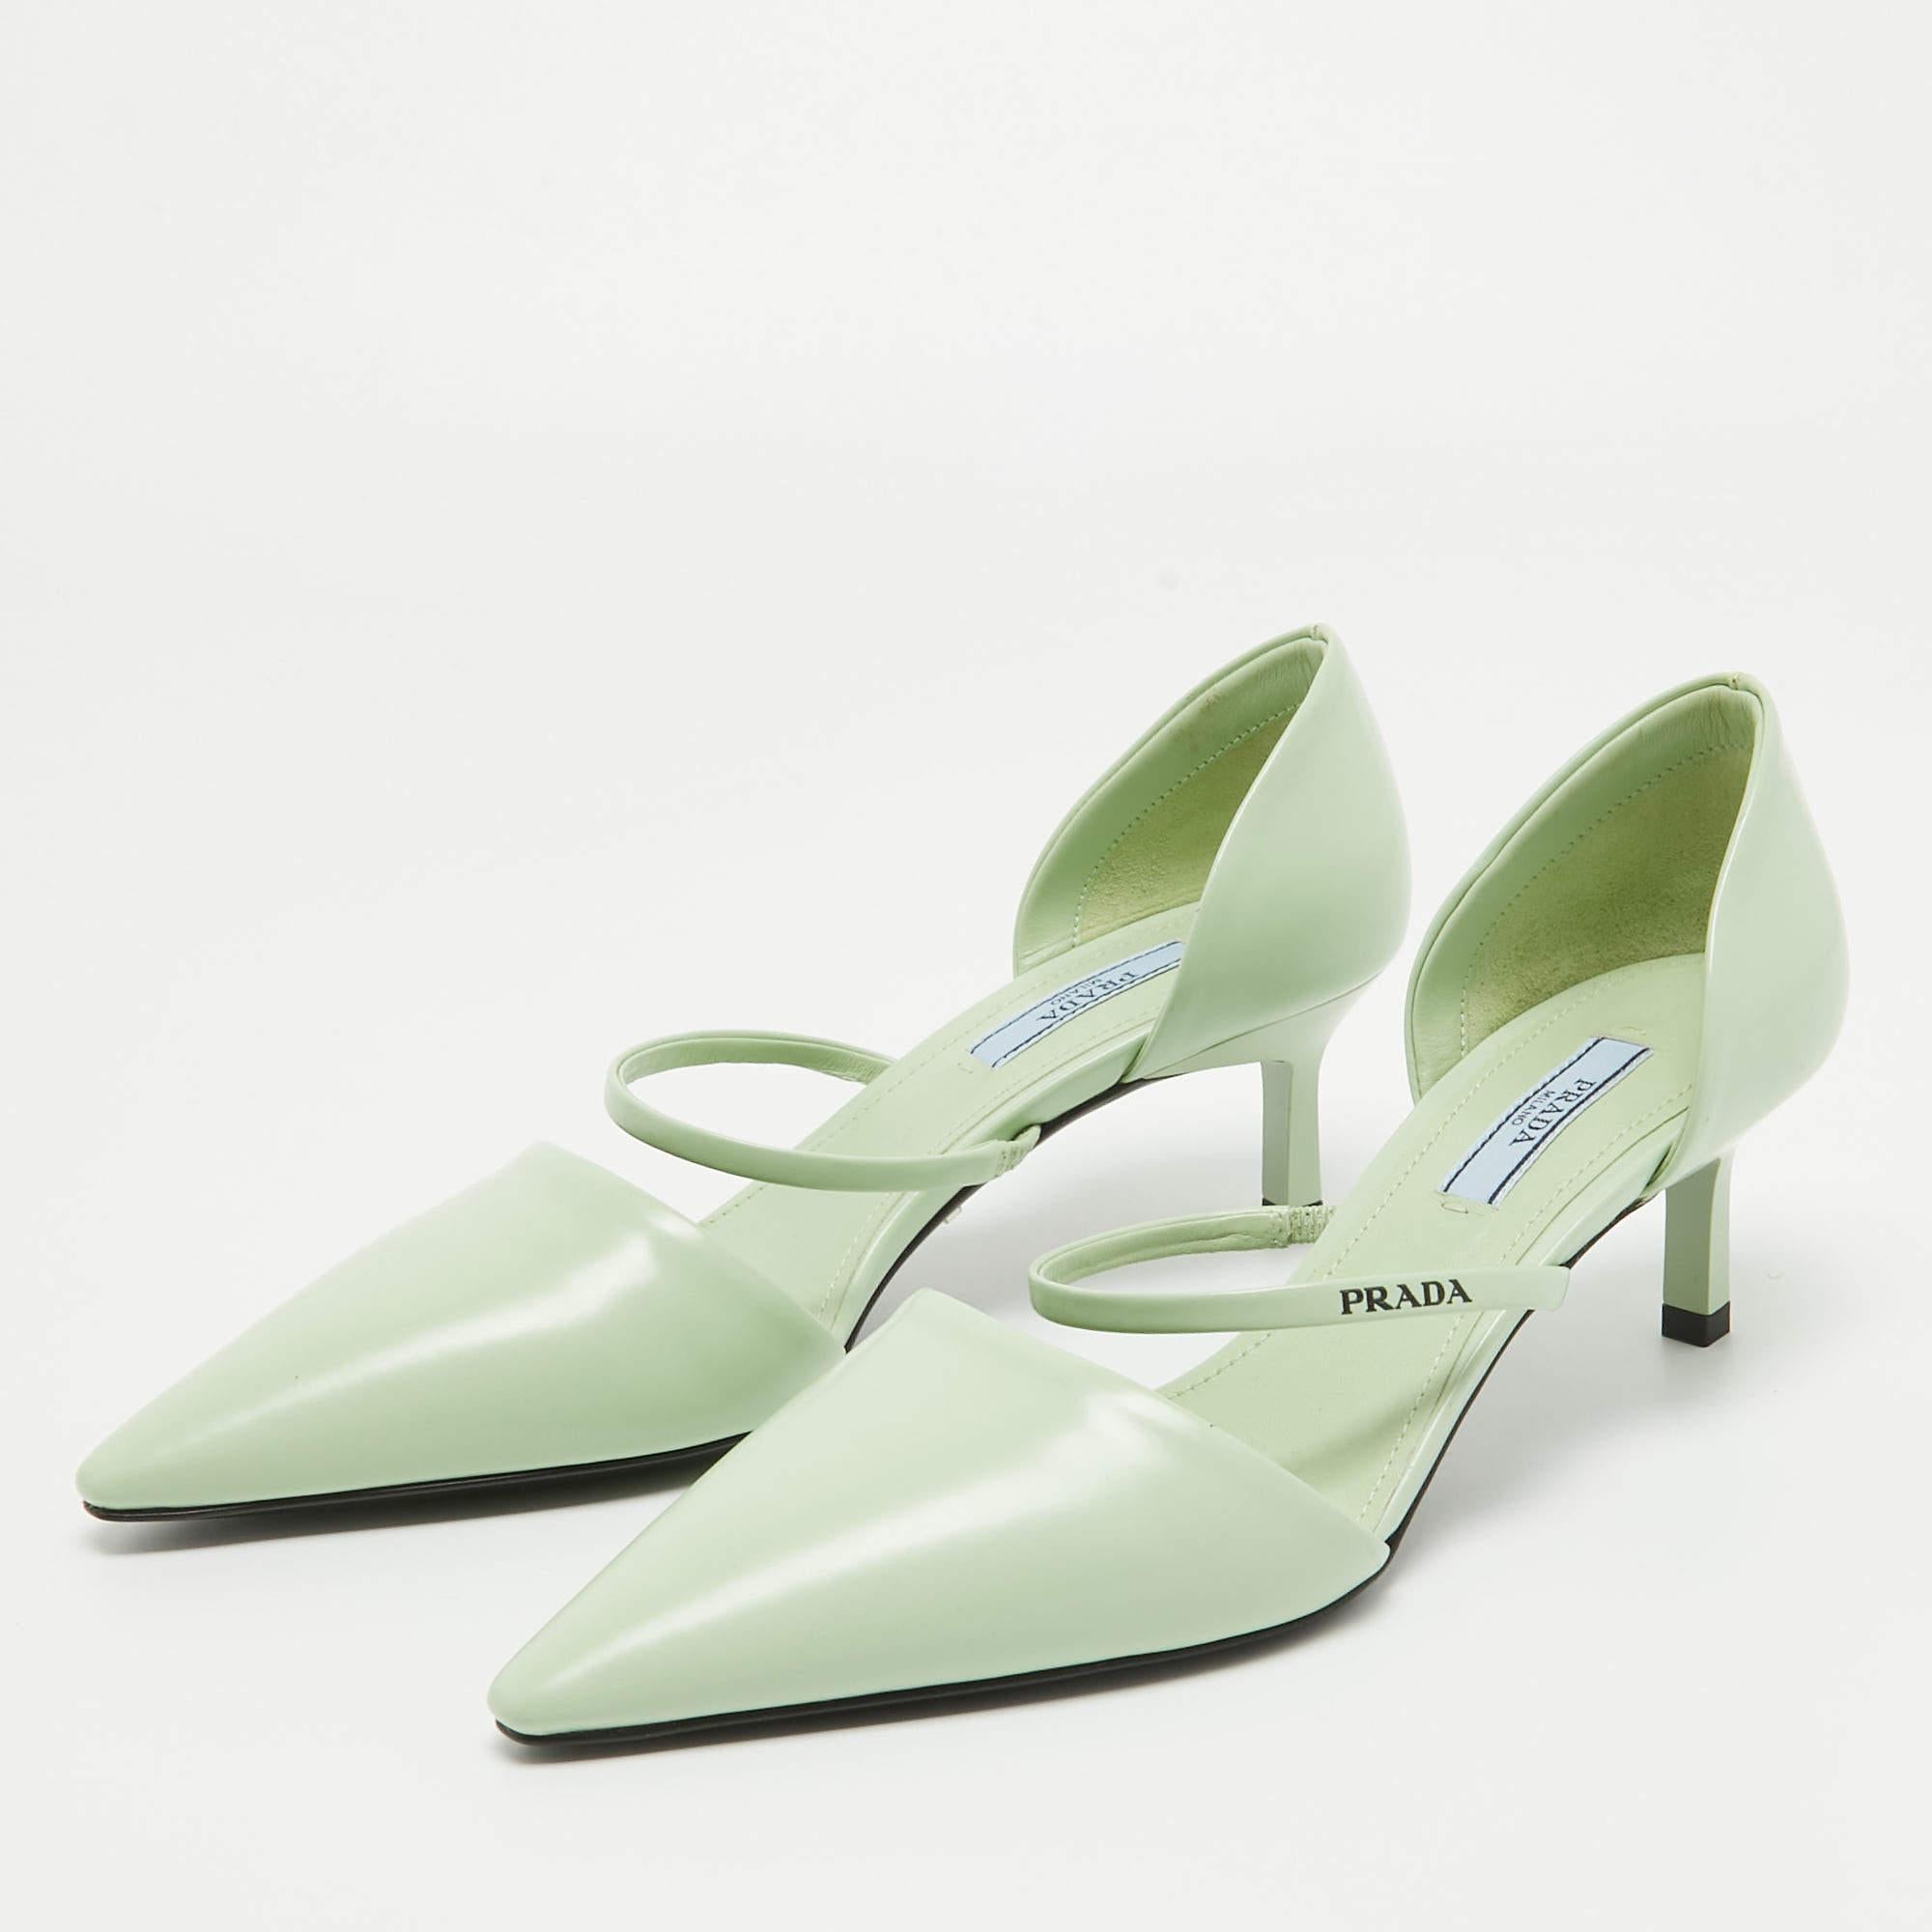 Prada Mint Green Leather Mary Jane D'orsay Pumps Size 37 1